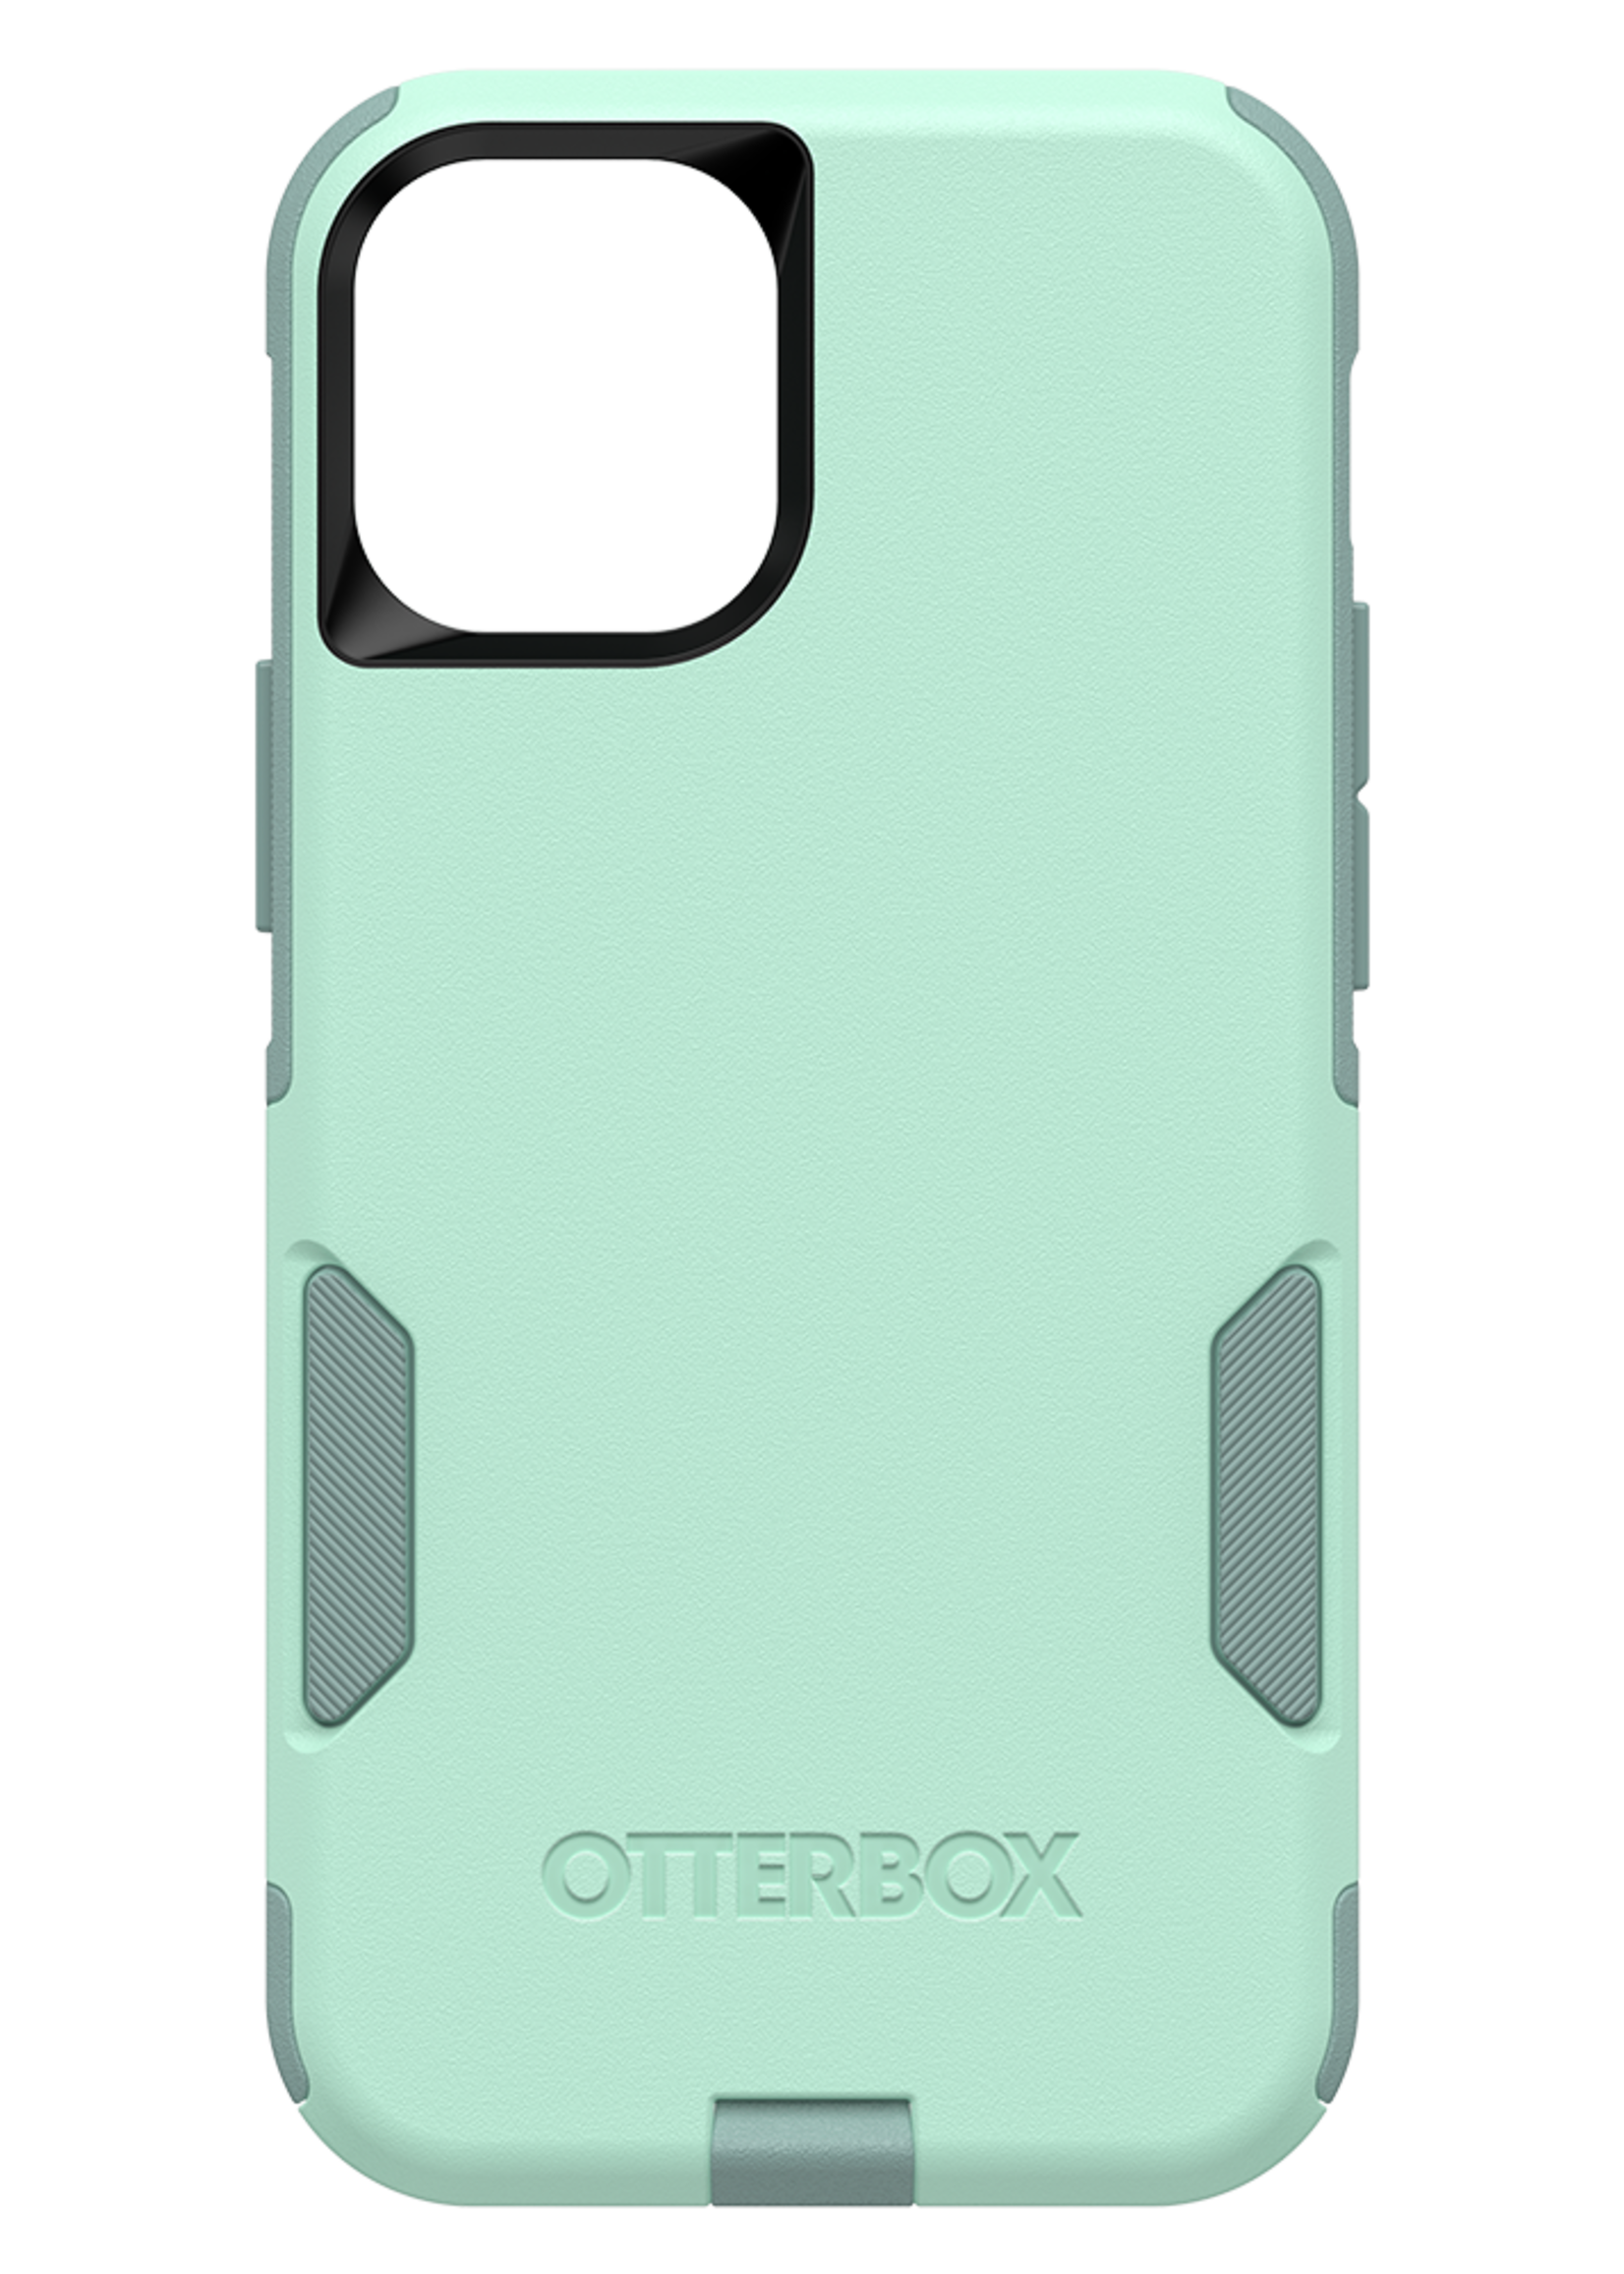 Otterbox OtterBox - Commuter Antimicrobial Case for Apple iPhone 12 mini - Ocean Way